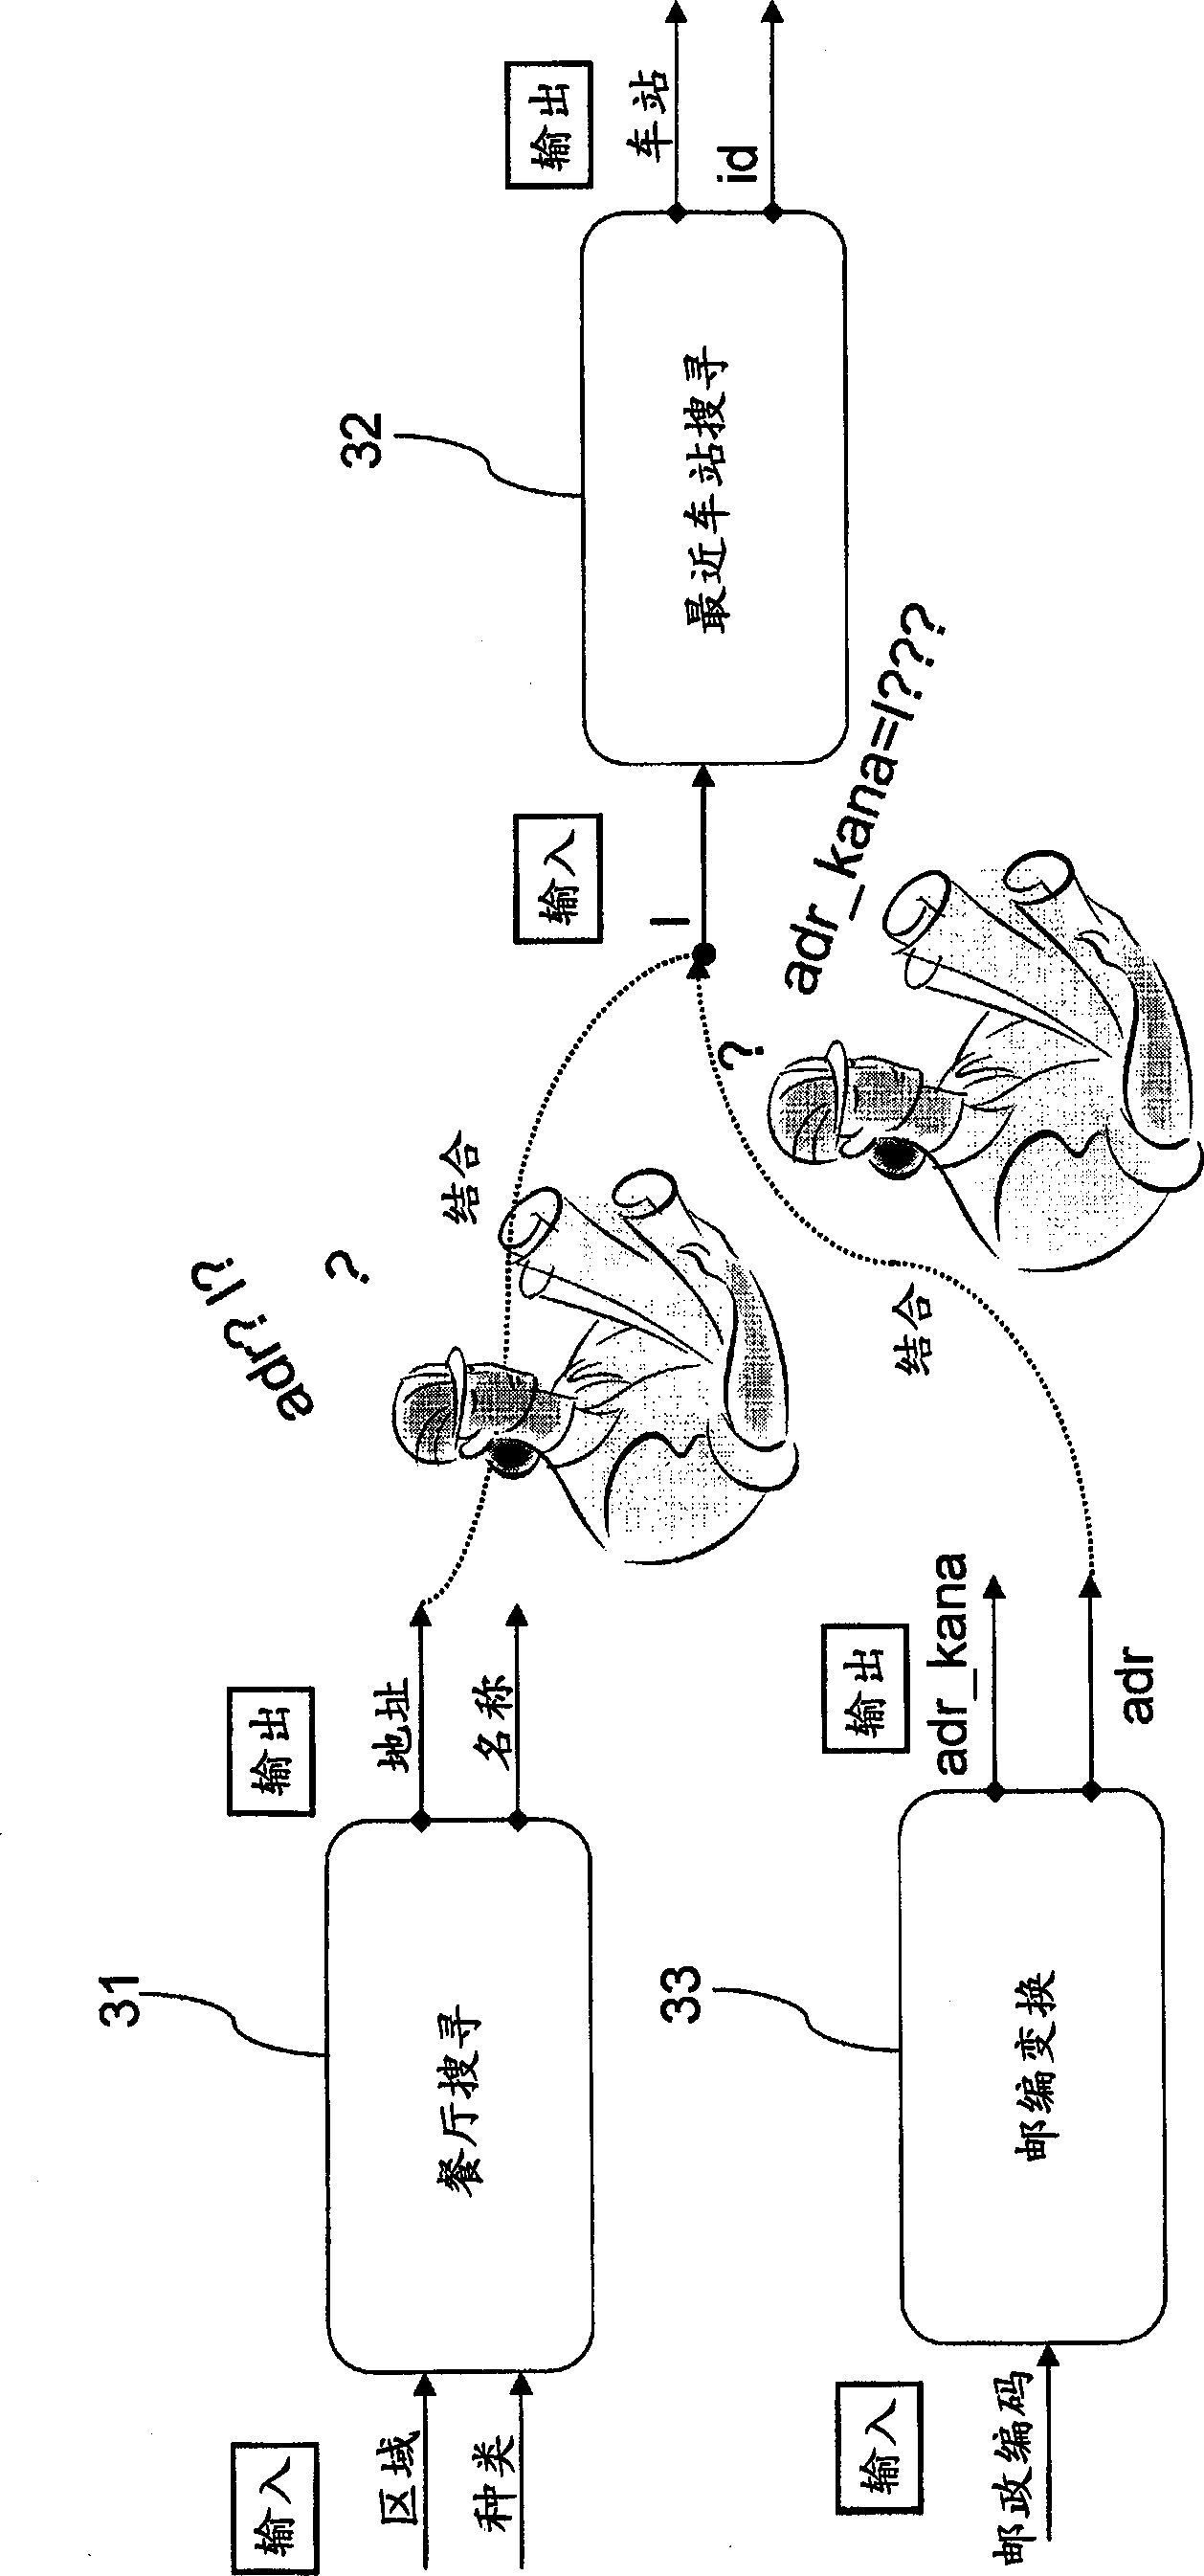 Apparatus and method for supporting data linkage among plurality of applications